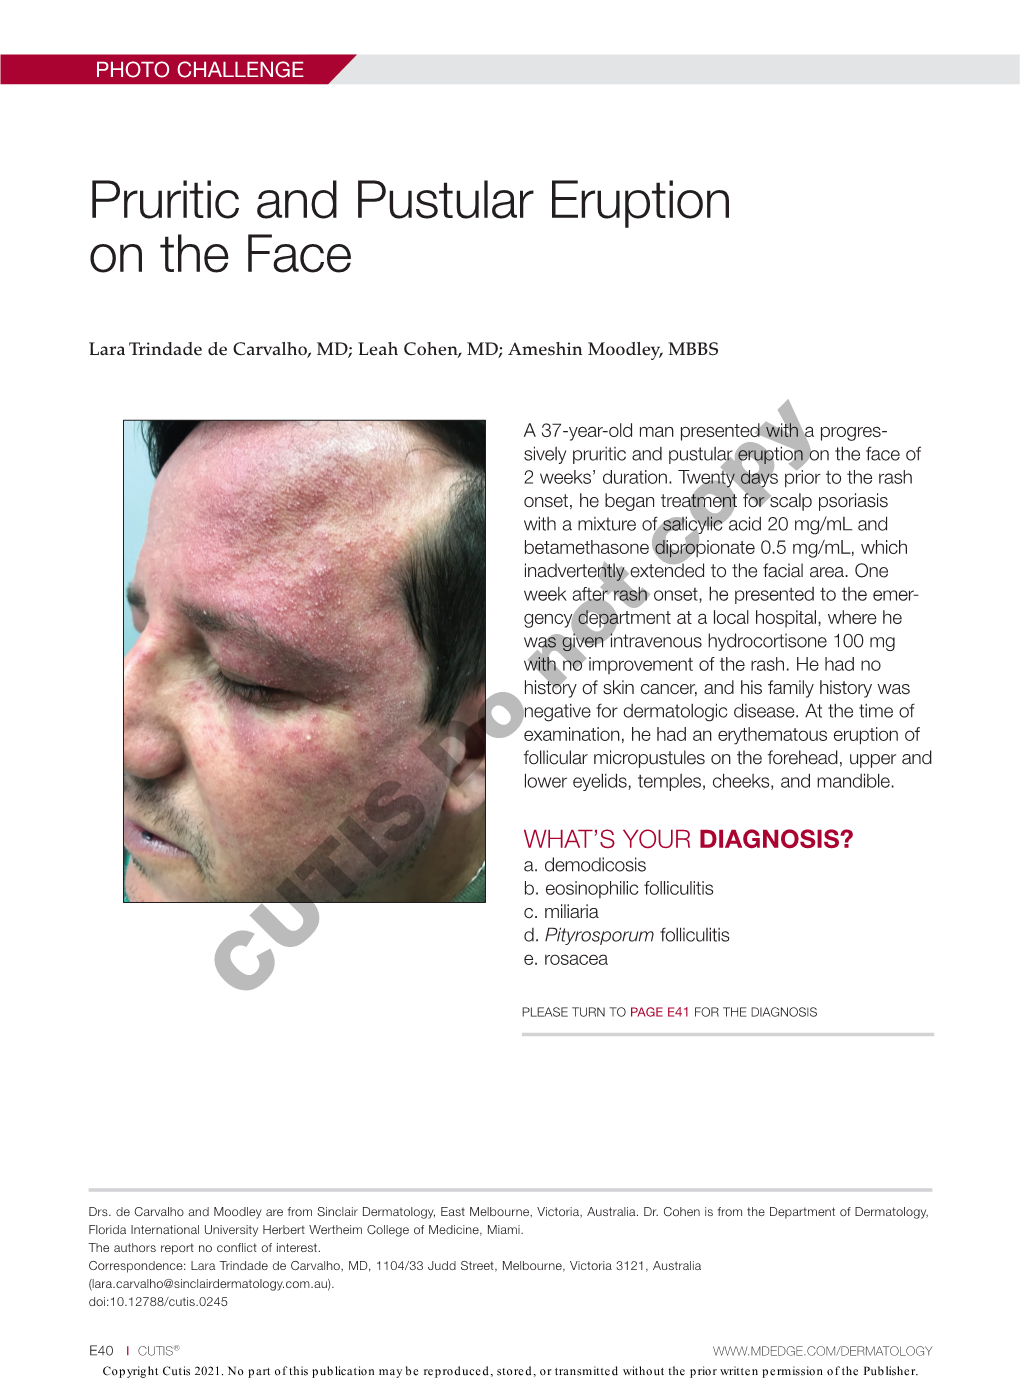 Pruritic and Pustular Eruption on the Face